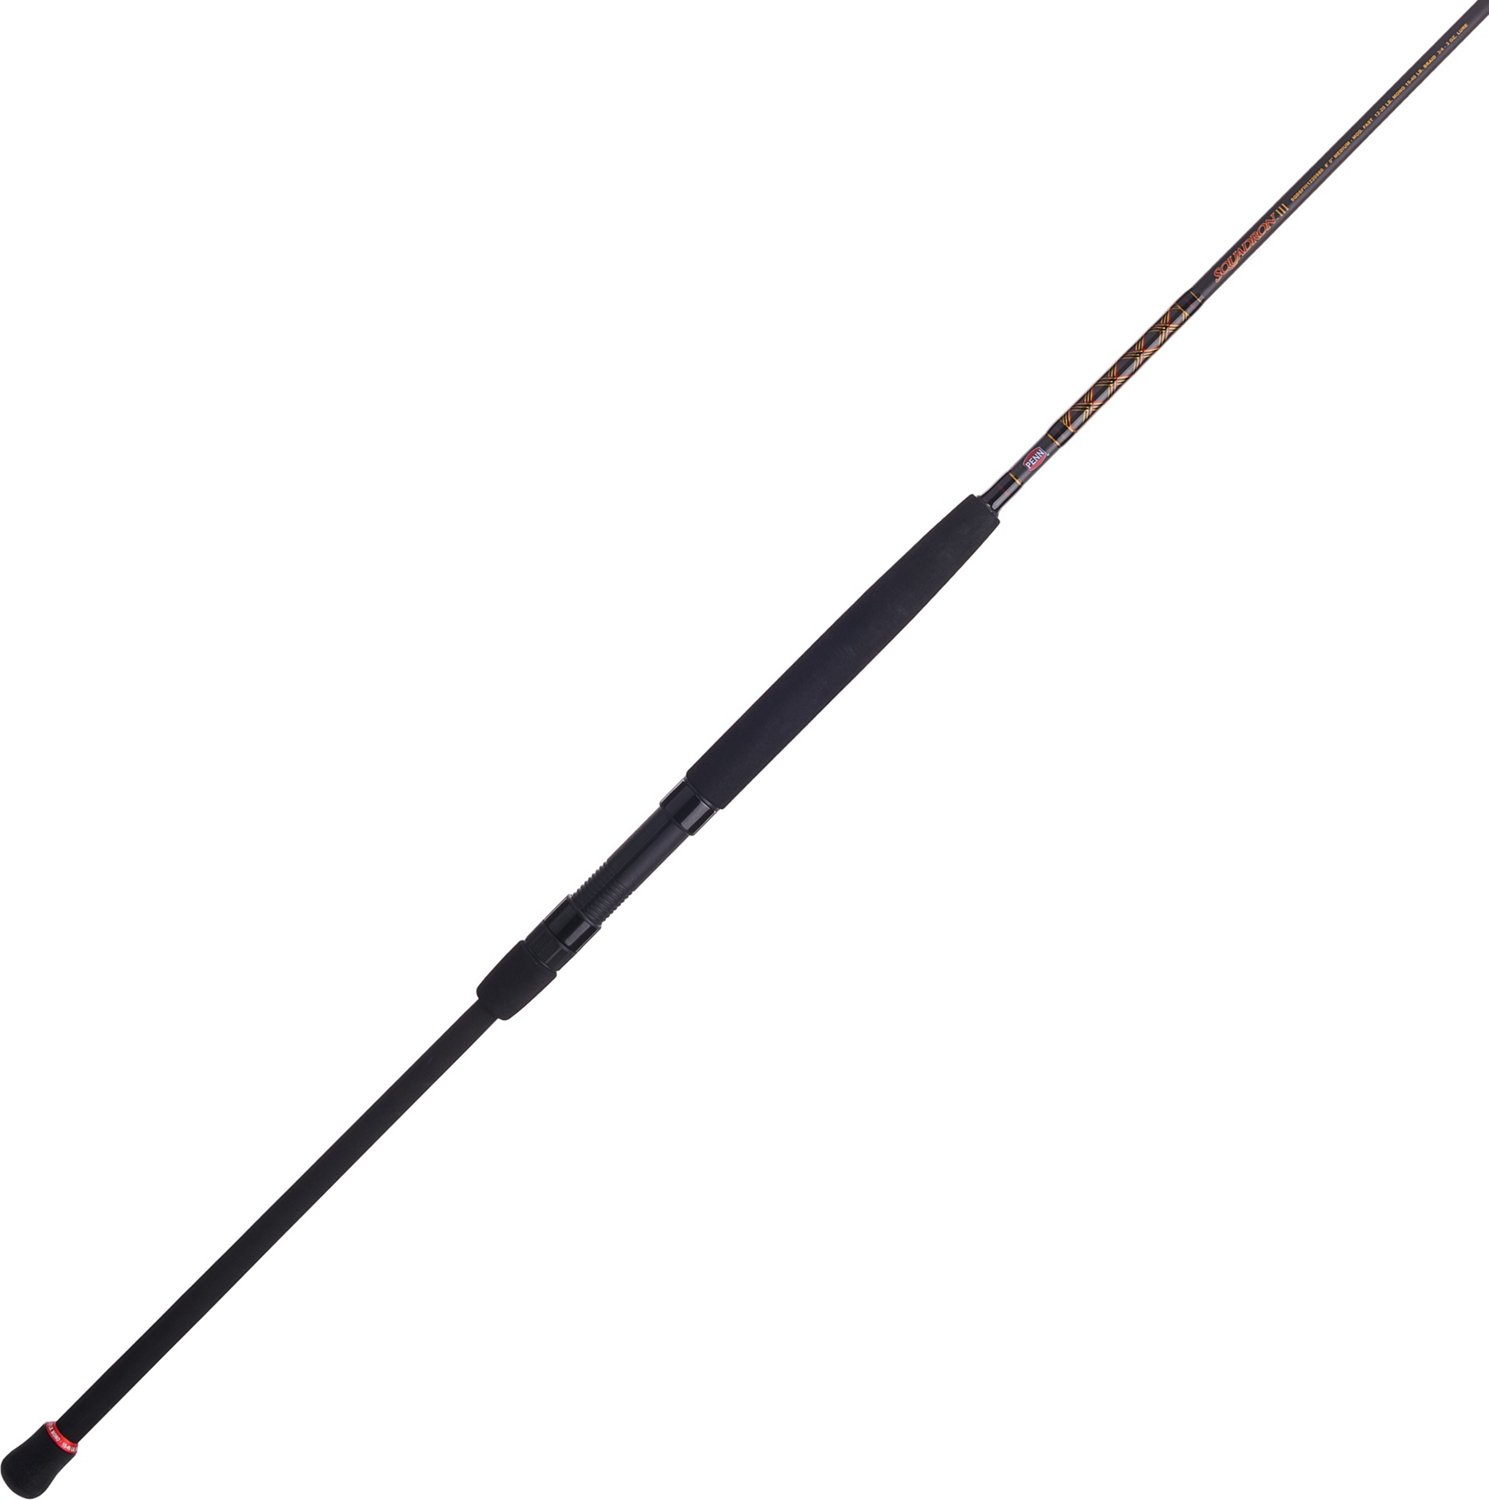 8 Best Types of Fishing Rods Every Angler Should Know